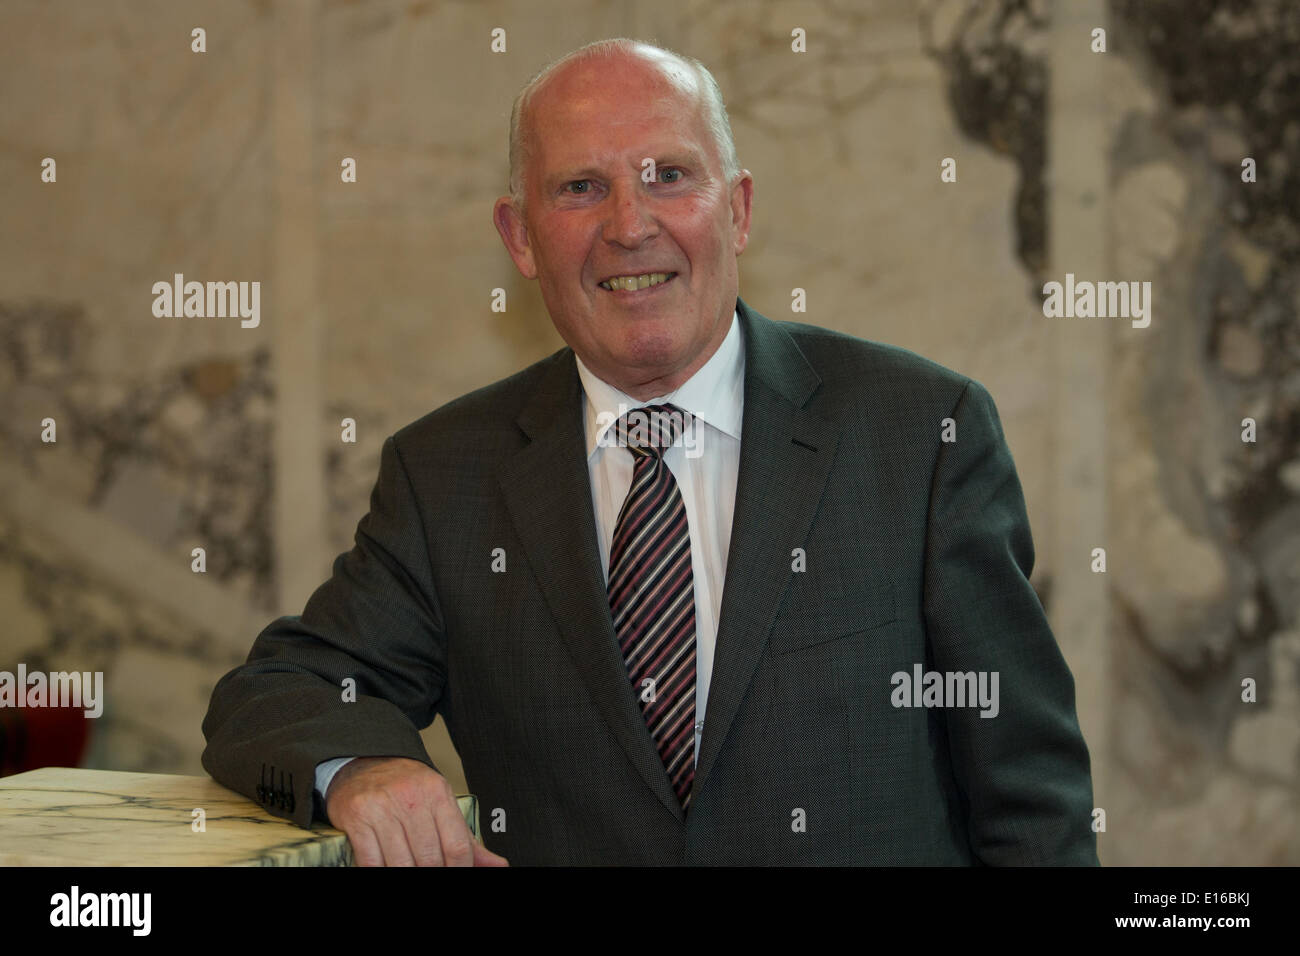 Belfast,UK 23rd May 2014 Ex Lord Mayor of Belfast Jim Rodgers OBE from the Ulster Unionist Party at Local Government Elections in Belfast Credit:  Bonzo/Alamy Live News Stock Photo